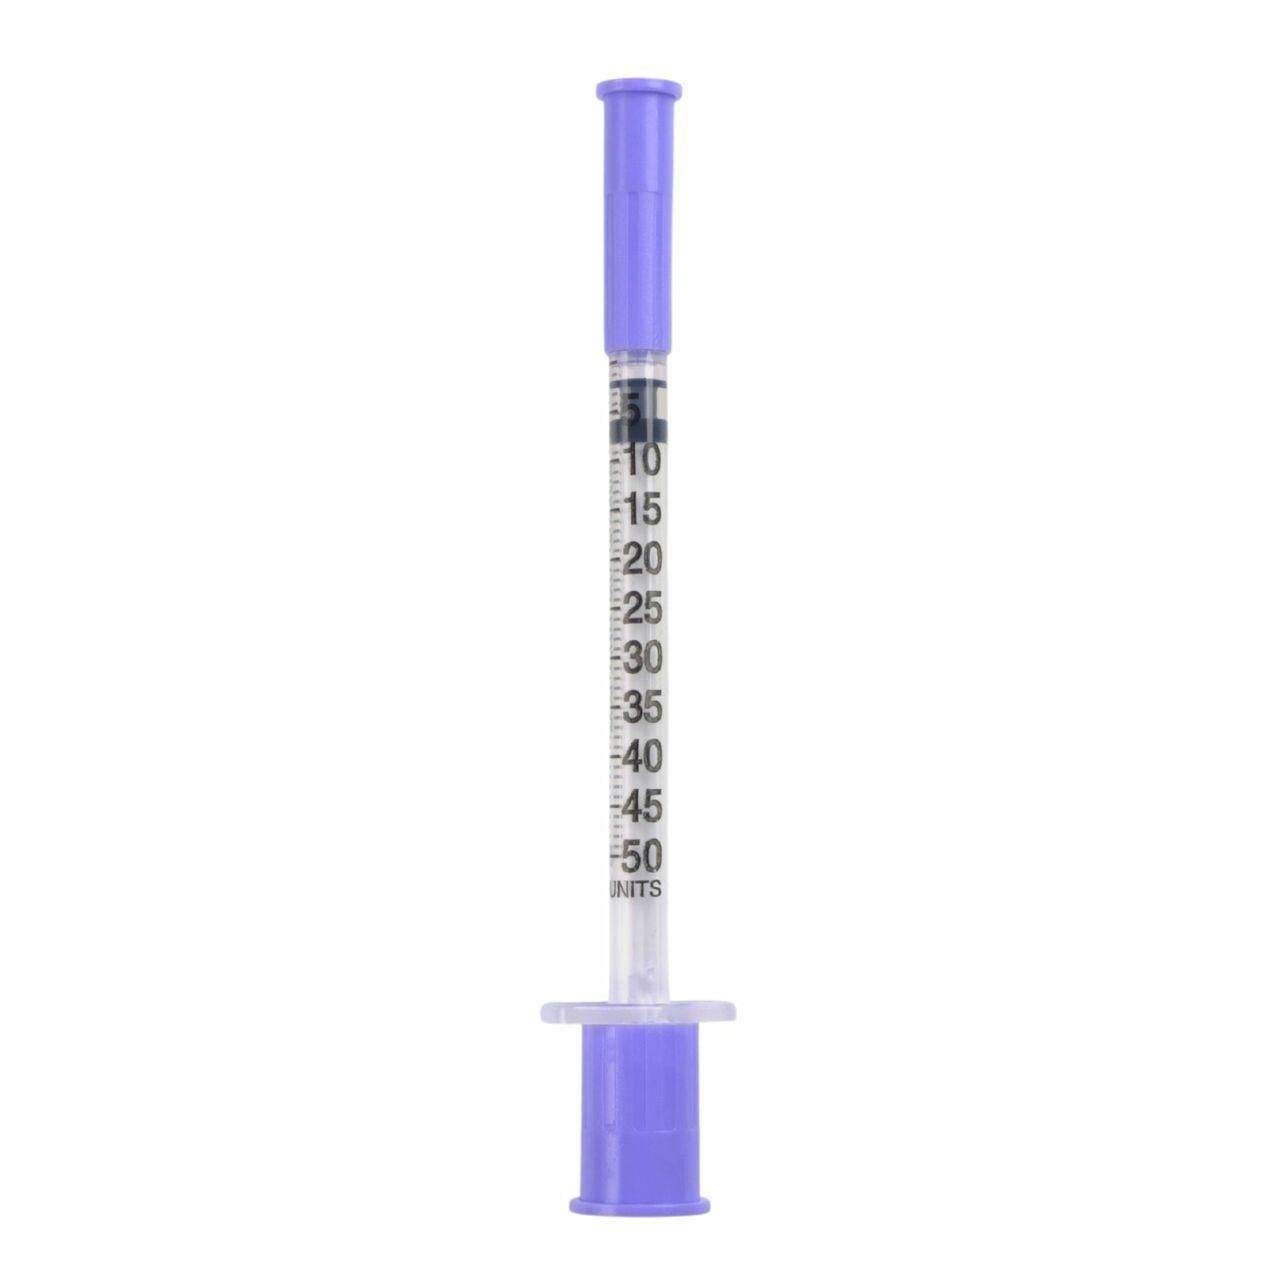 Find FMS Microfine 0.5ml 32G 8mm insulin needles pack of 10